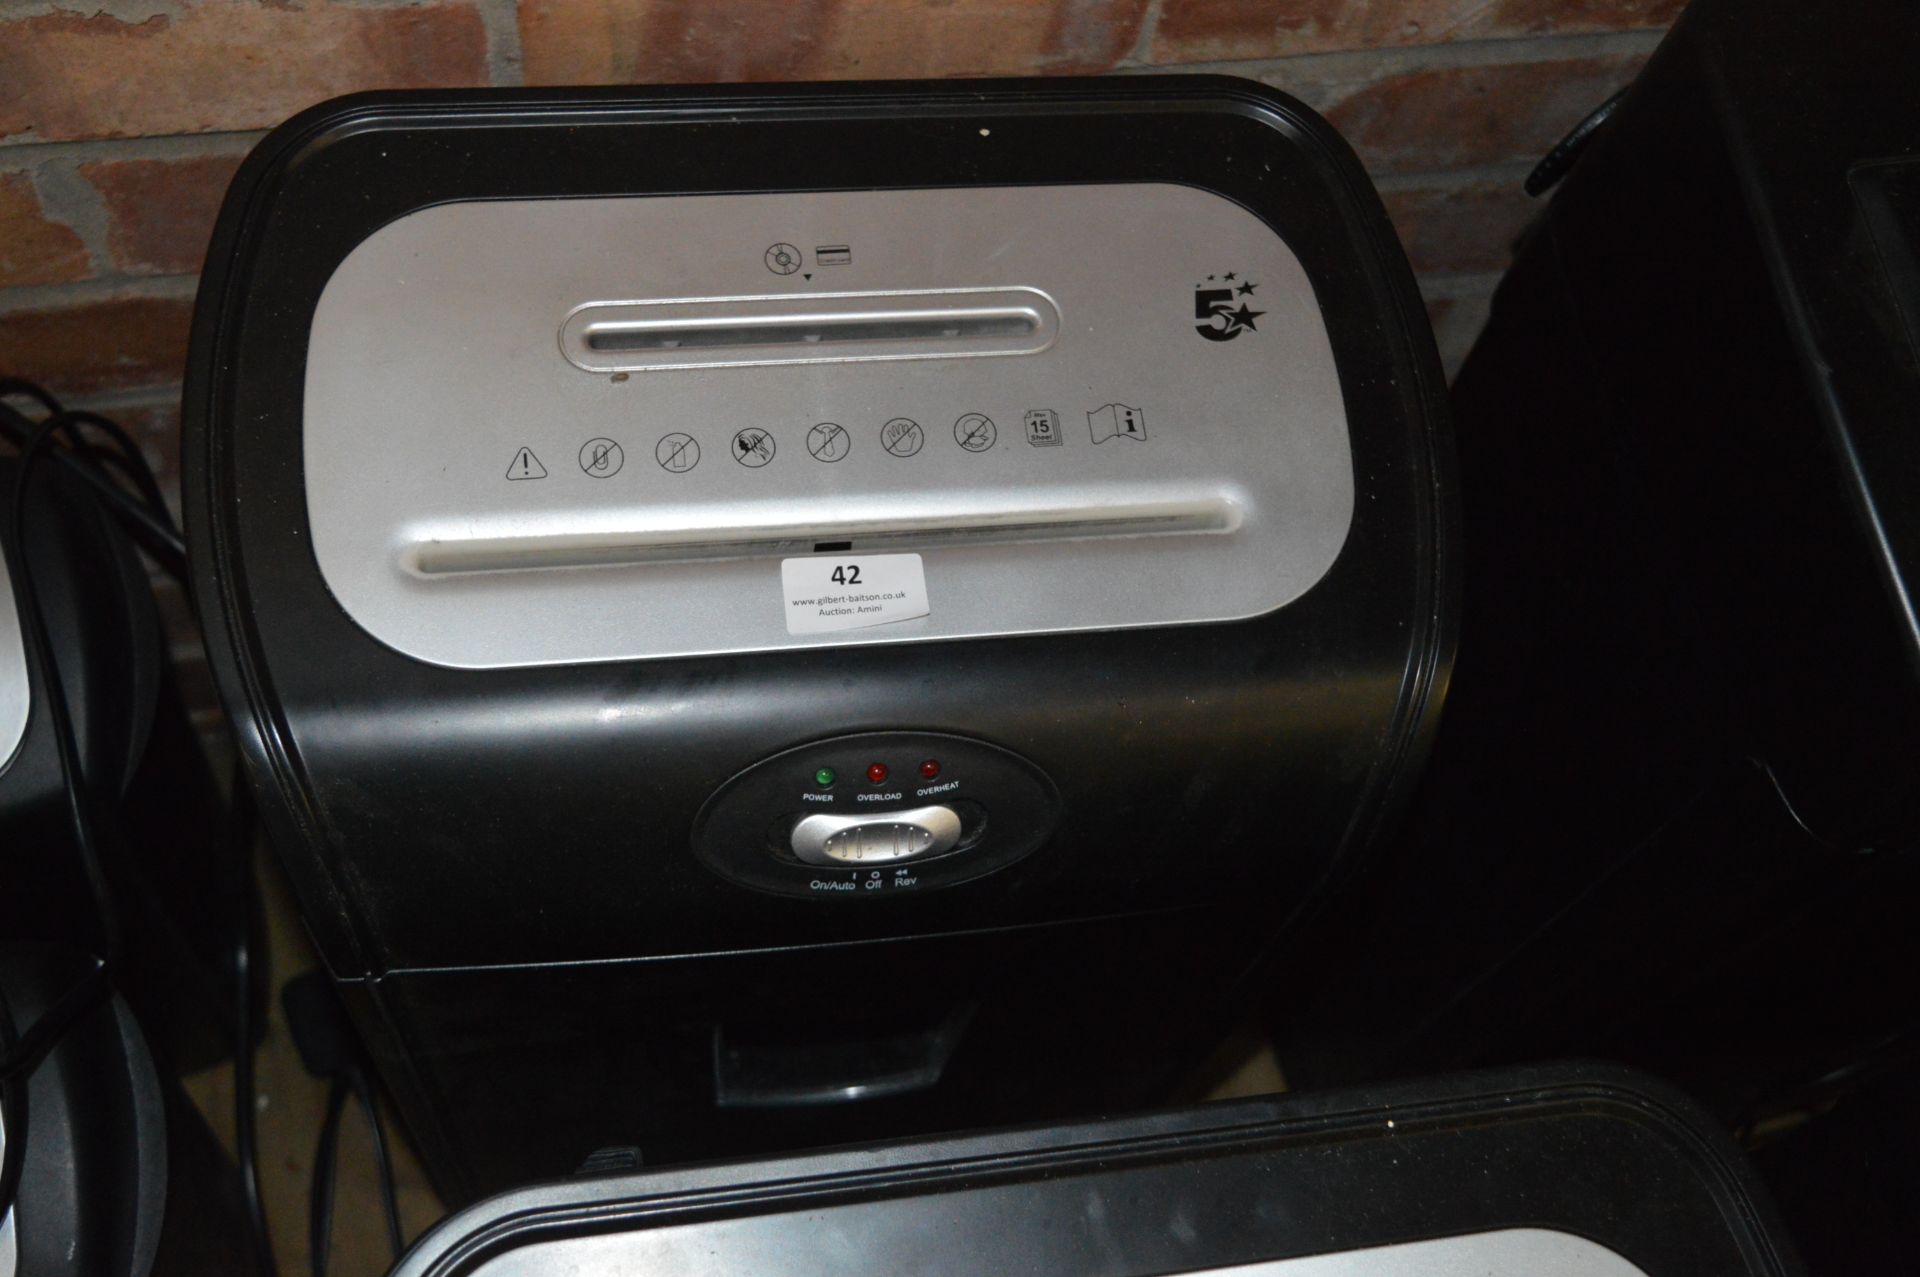 *5 Star Paper Shredder with CD and Credit Card Facility